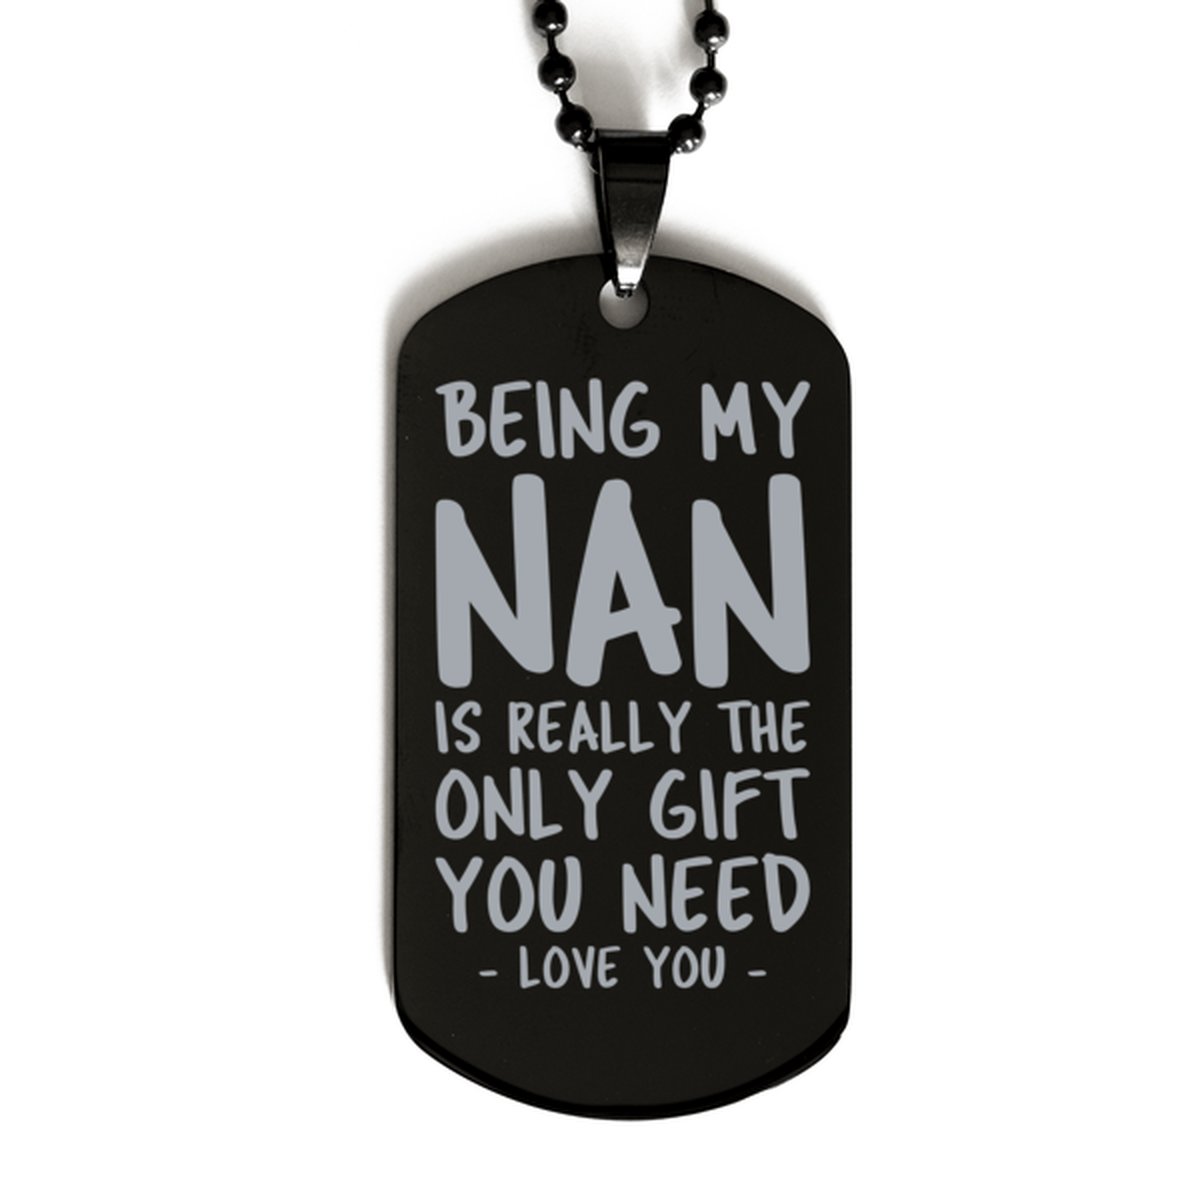 Funny Nan Black Dog Tag Necklace, Being My Nan Is Really the Only Gift You Need, Best Birthday Gifts for Nan